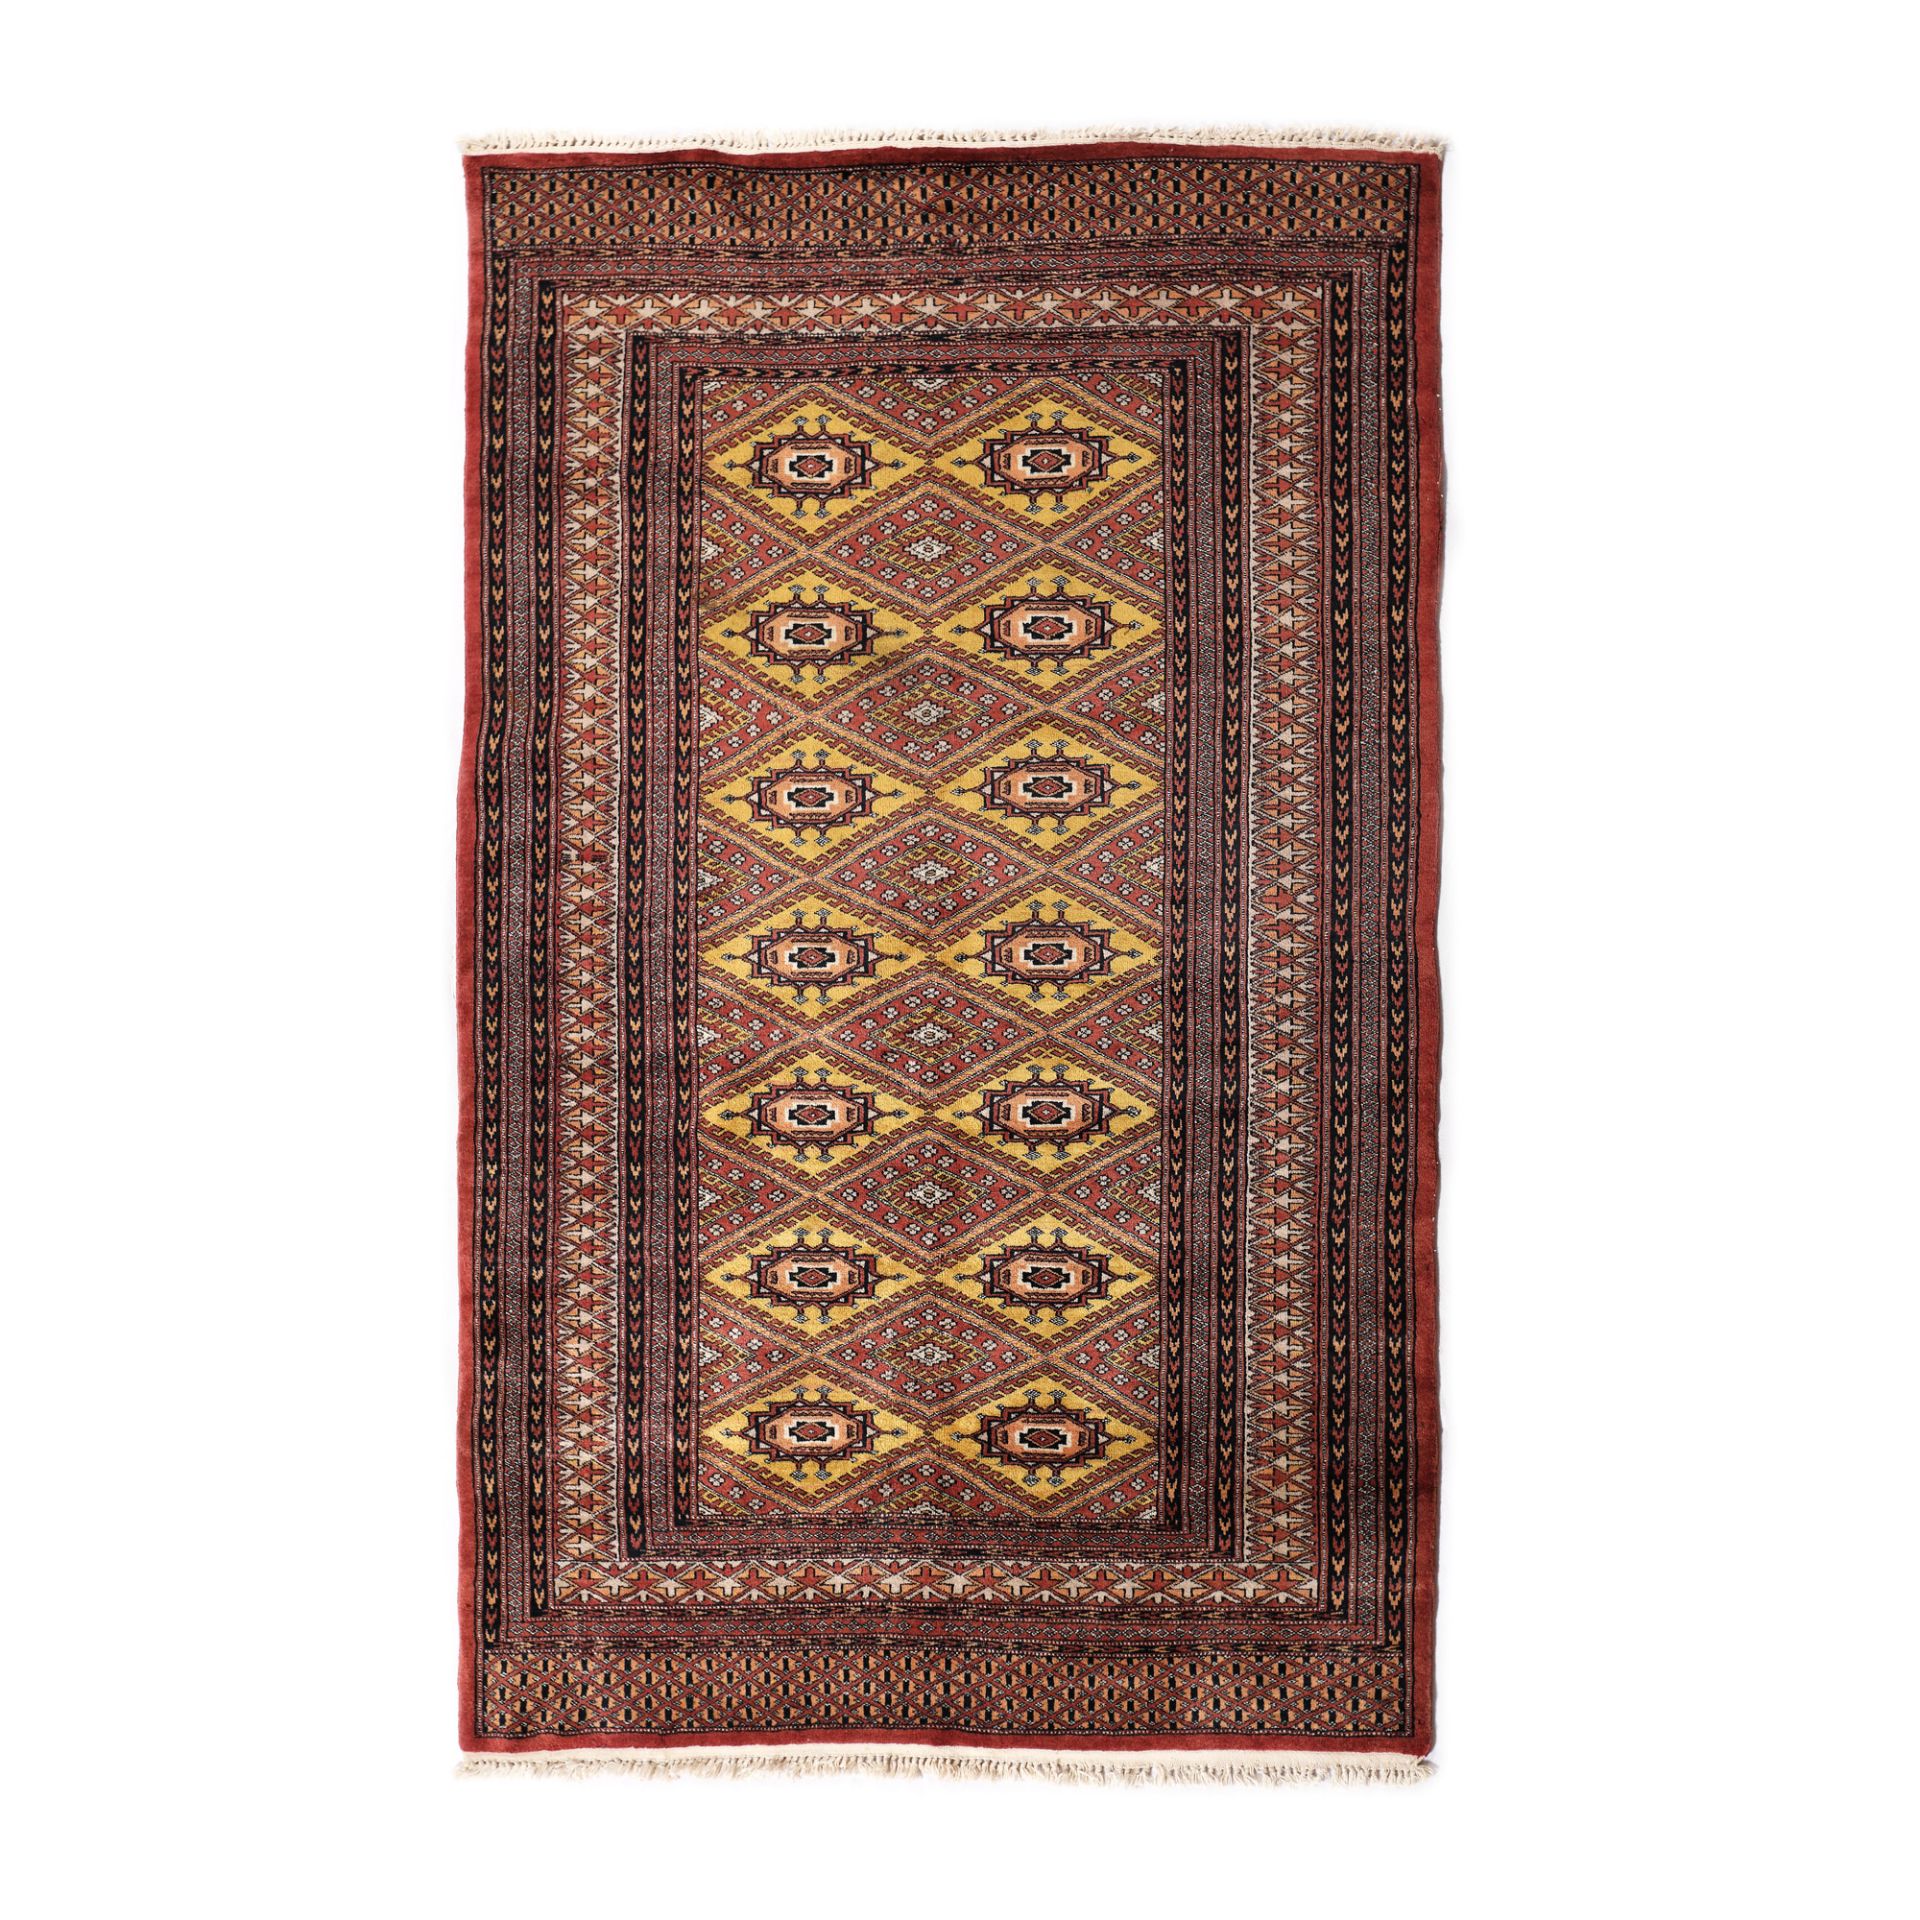 Tekke-Buhara wool and cotton rug, decorated with specific medallions, green background, Turkmenistan